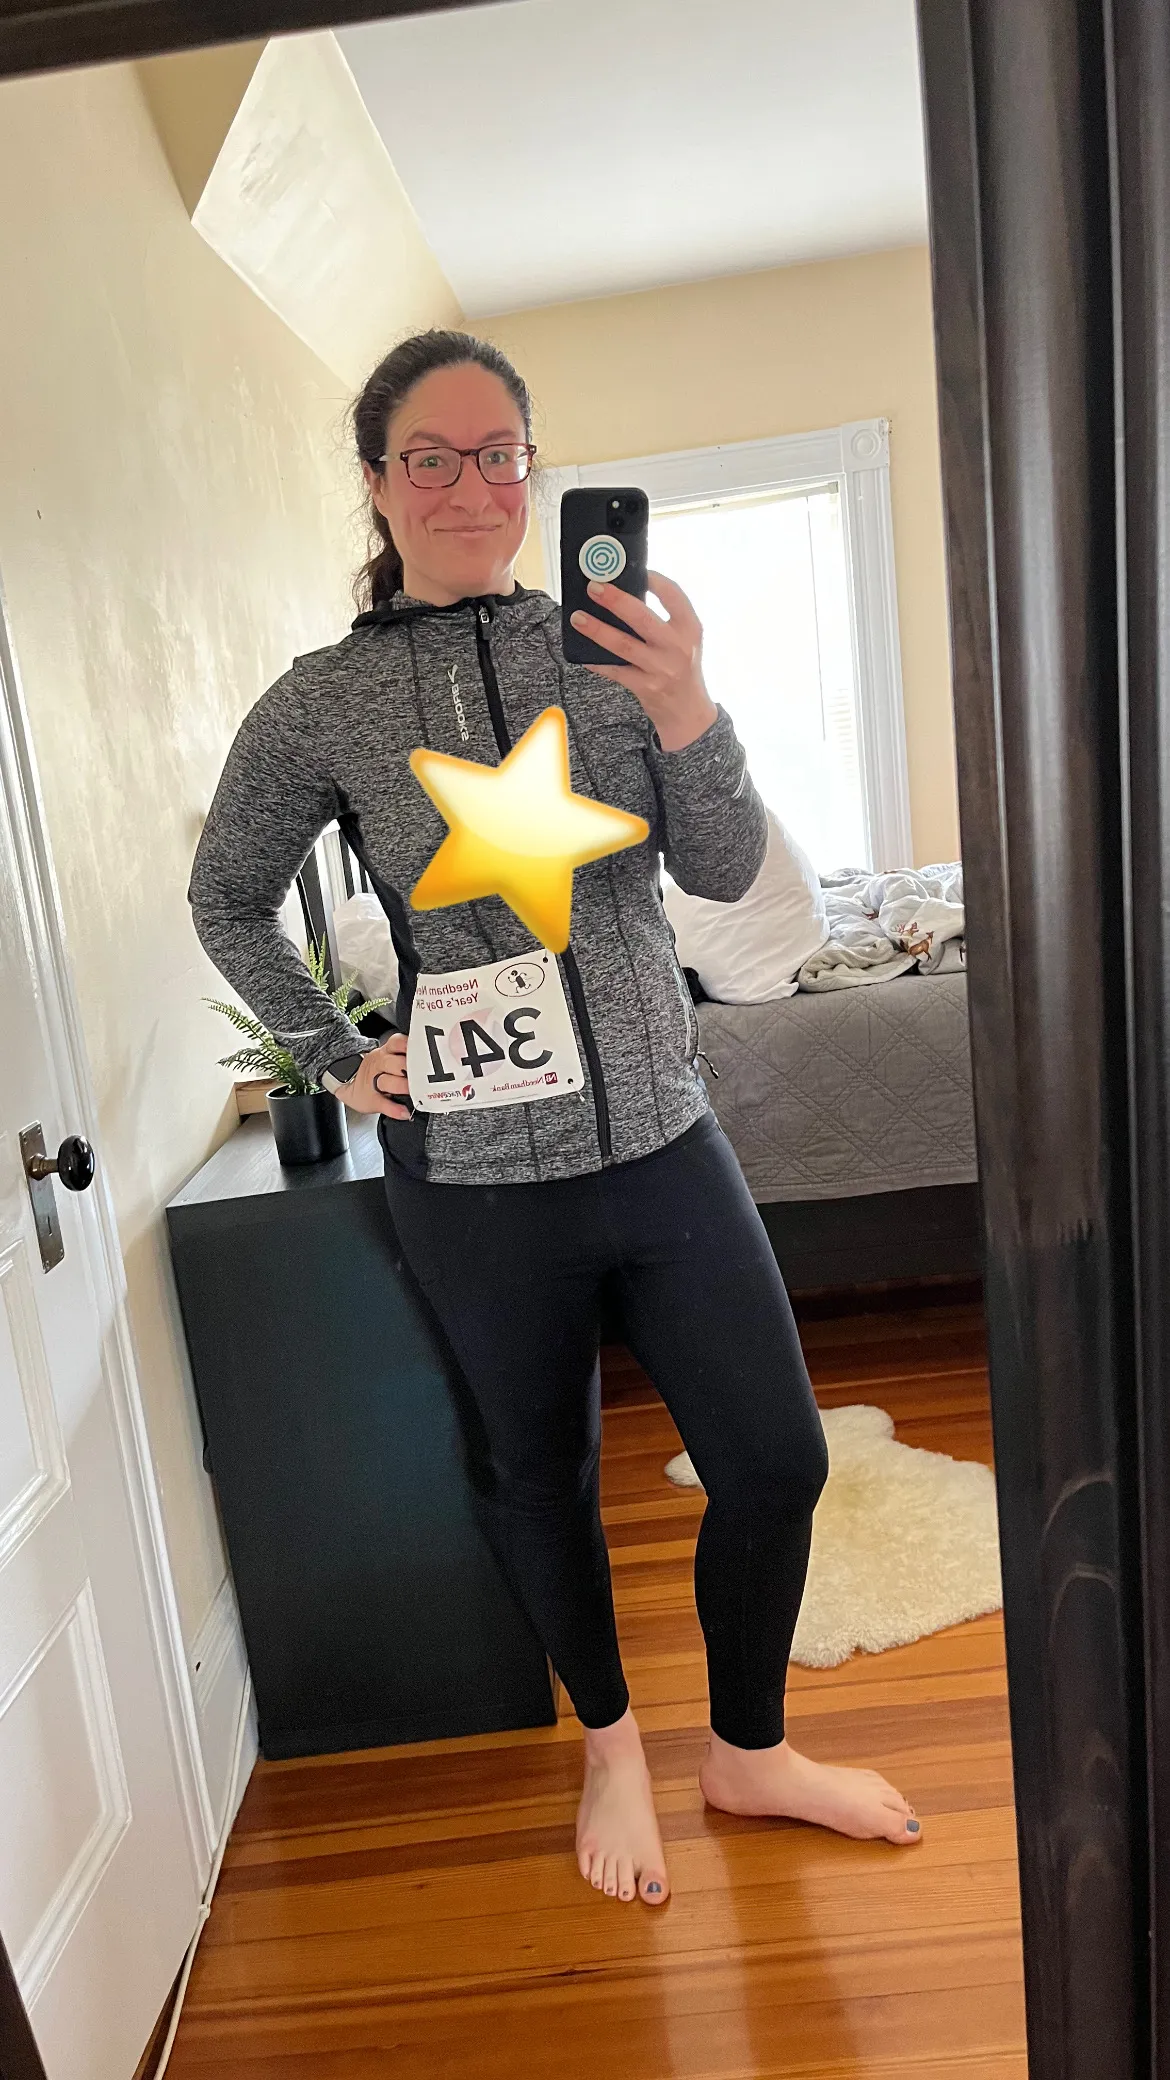 Photo of Sam Tackeff in front of a mirror wearing running gear and a race bib